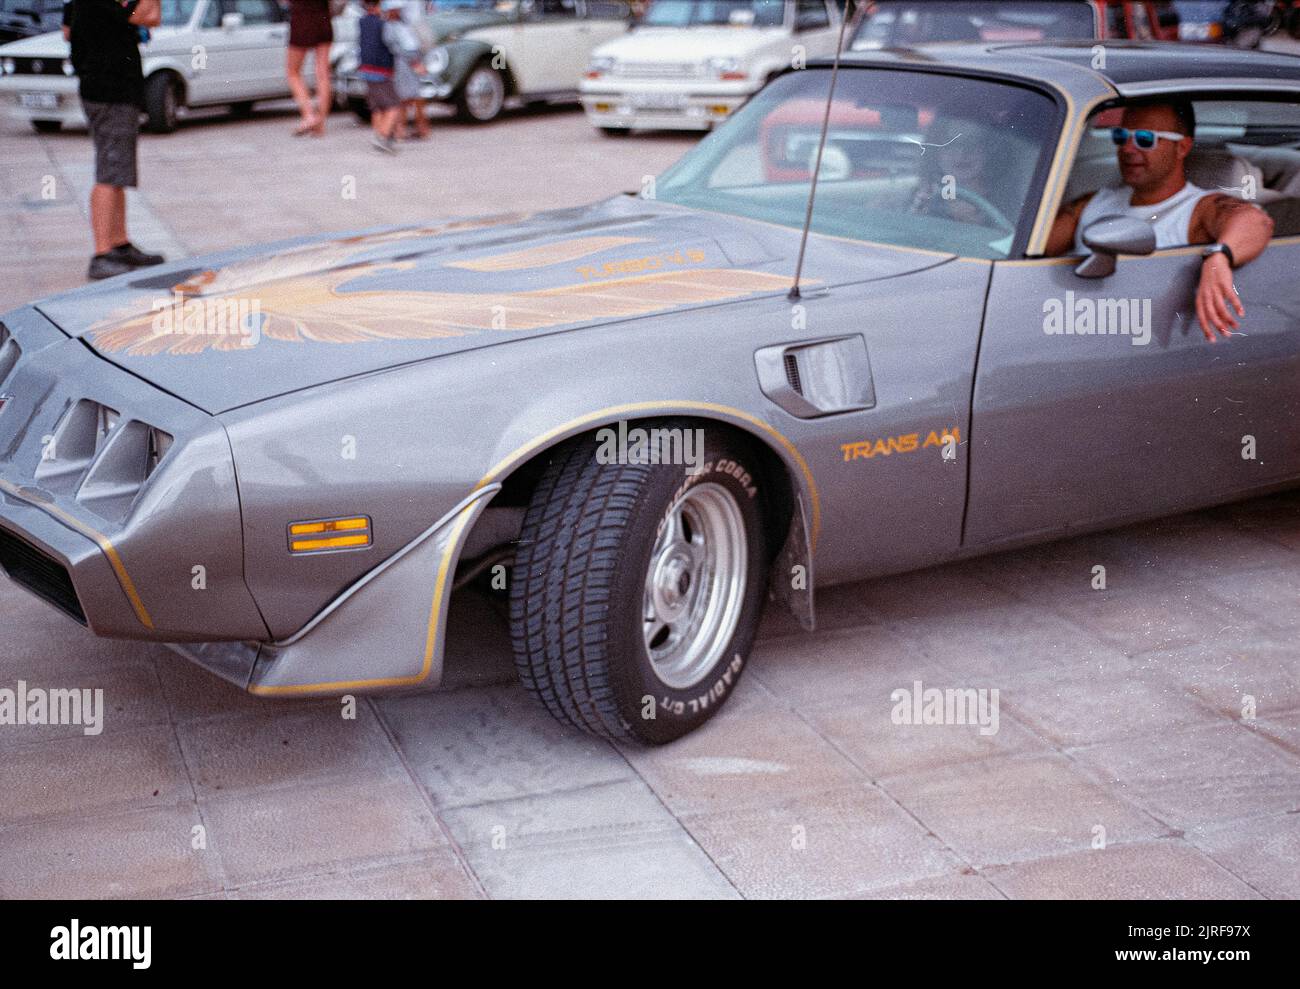 A  gray Pontiac Firebird Trans AM parked on the road near other cars Stock Photo